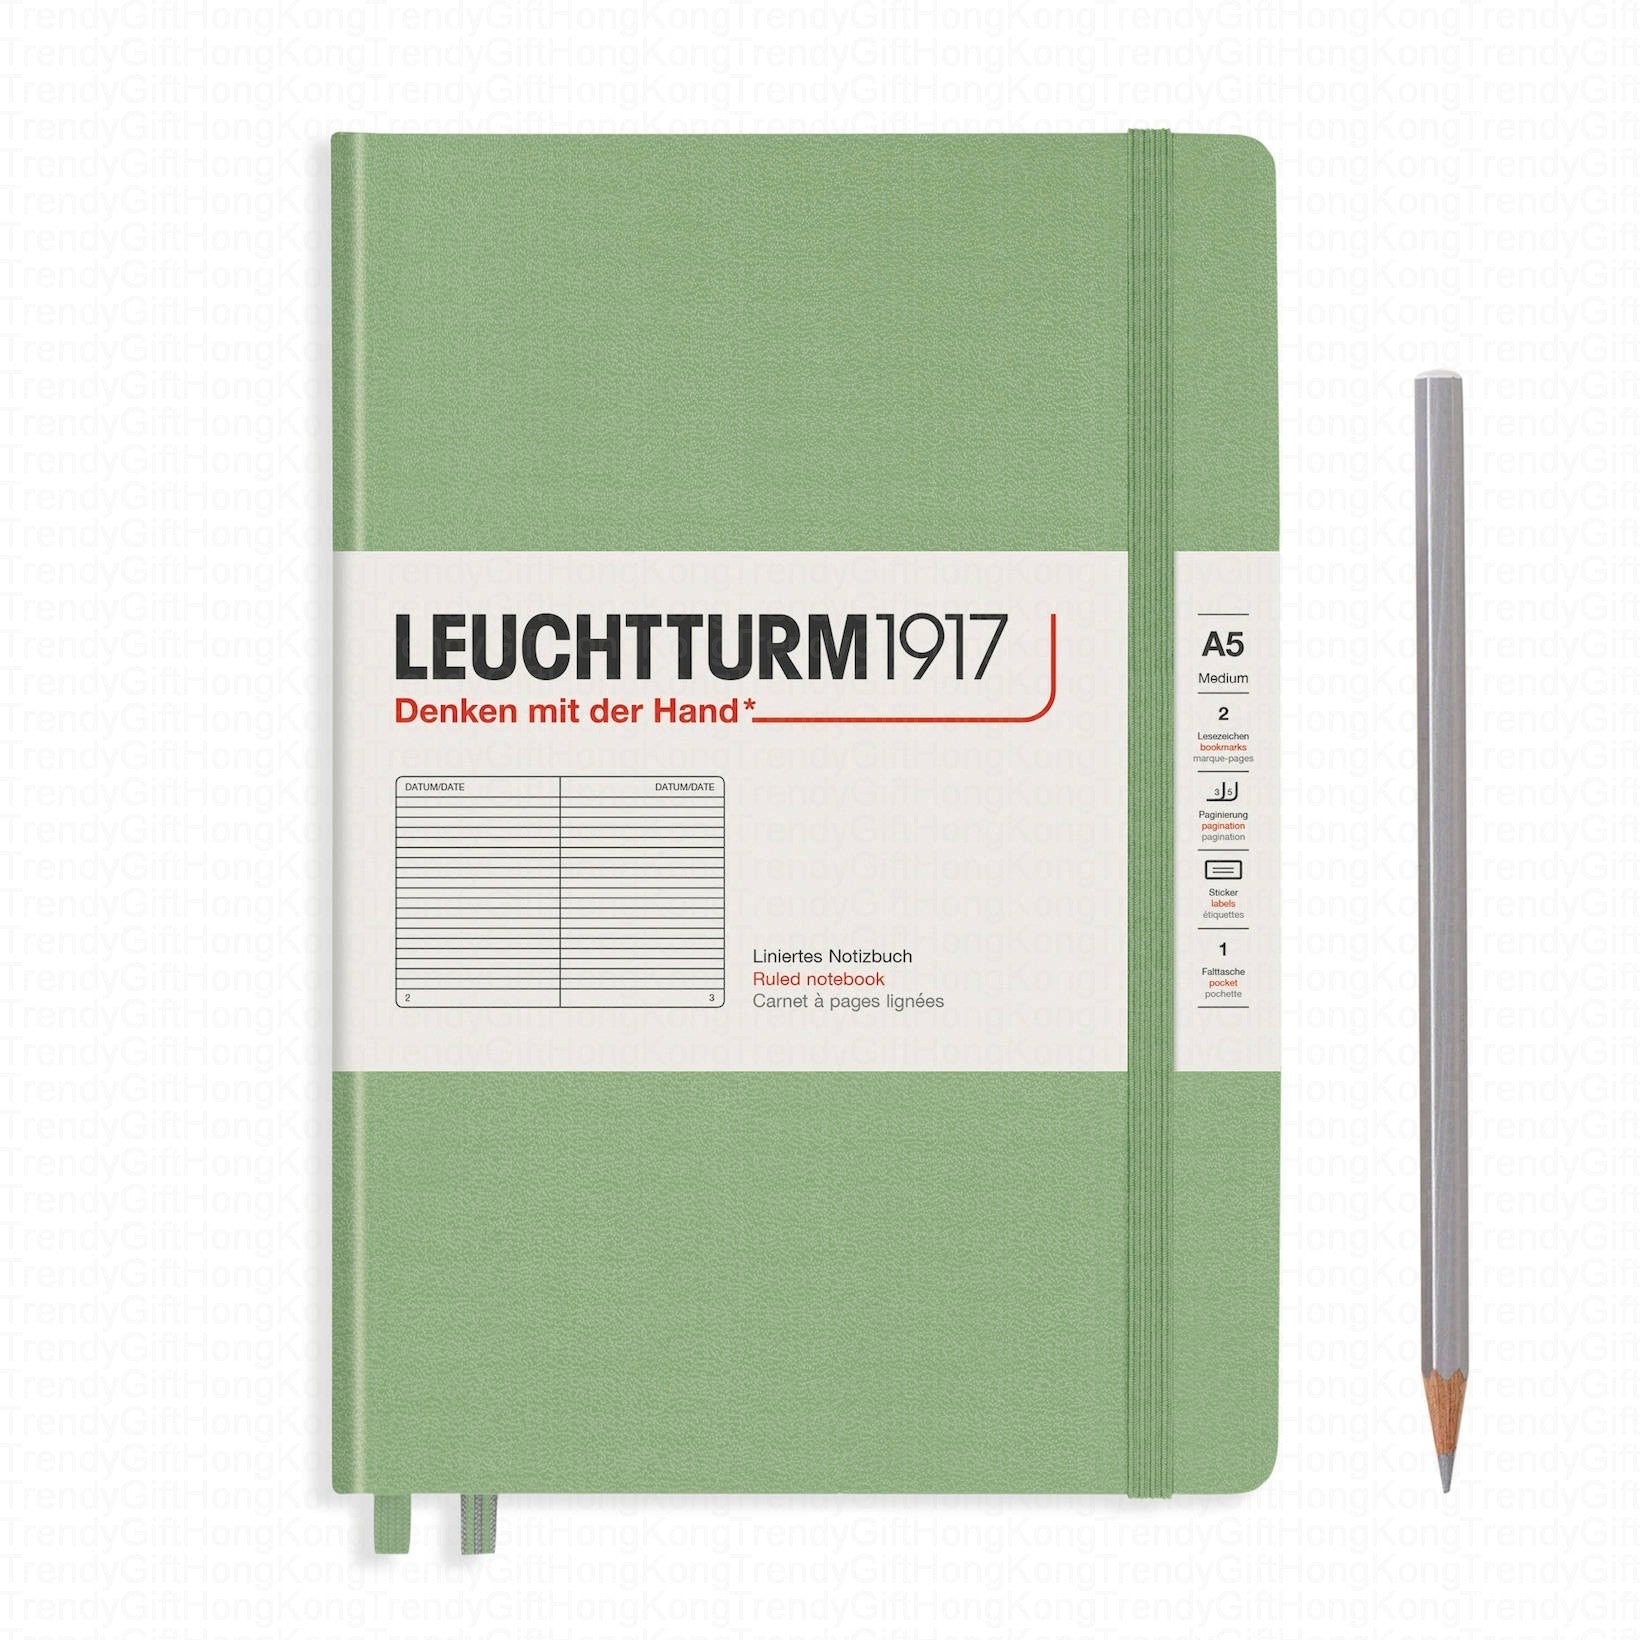 Leuchtturm 1917 Notebook Medium A5 Hardcover, 249 Numbered Pages trendygifthk